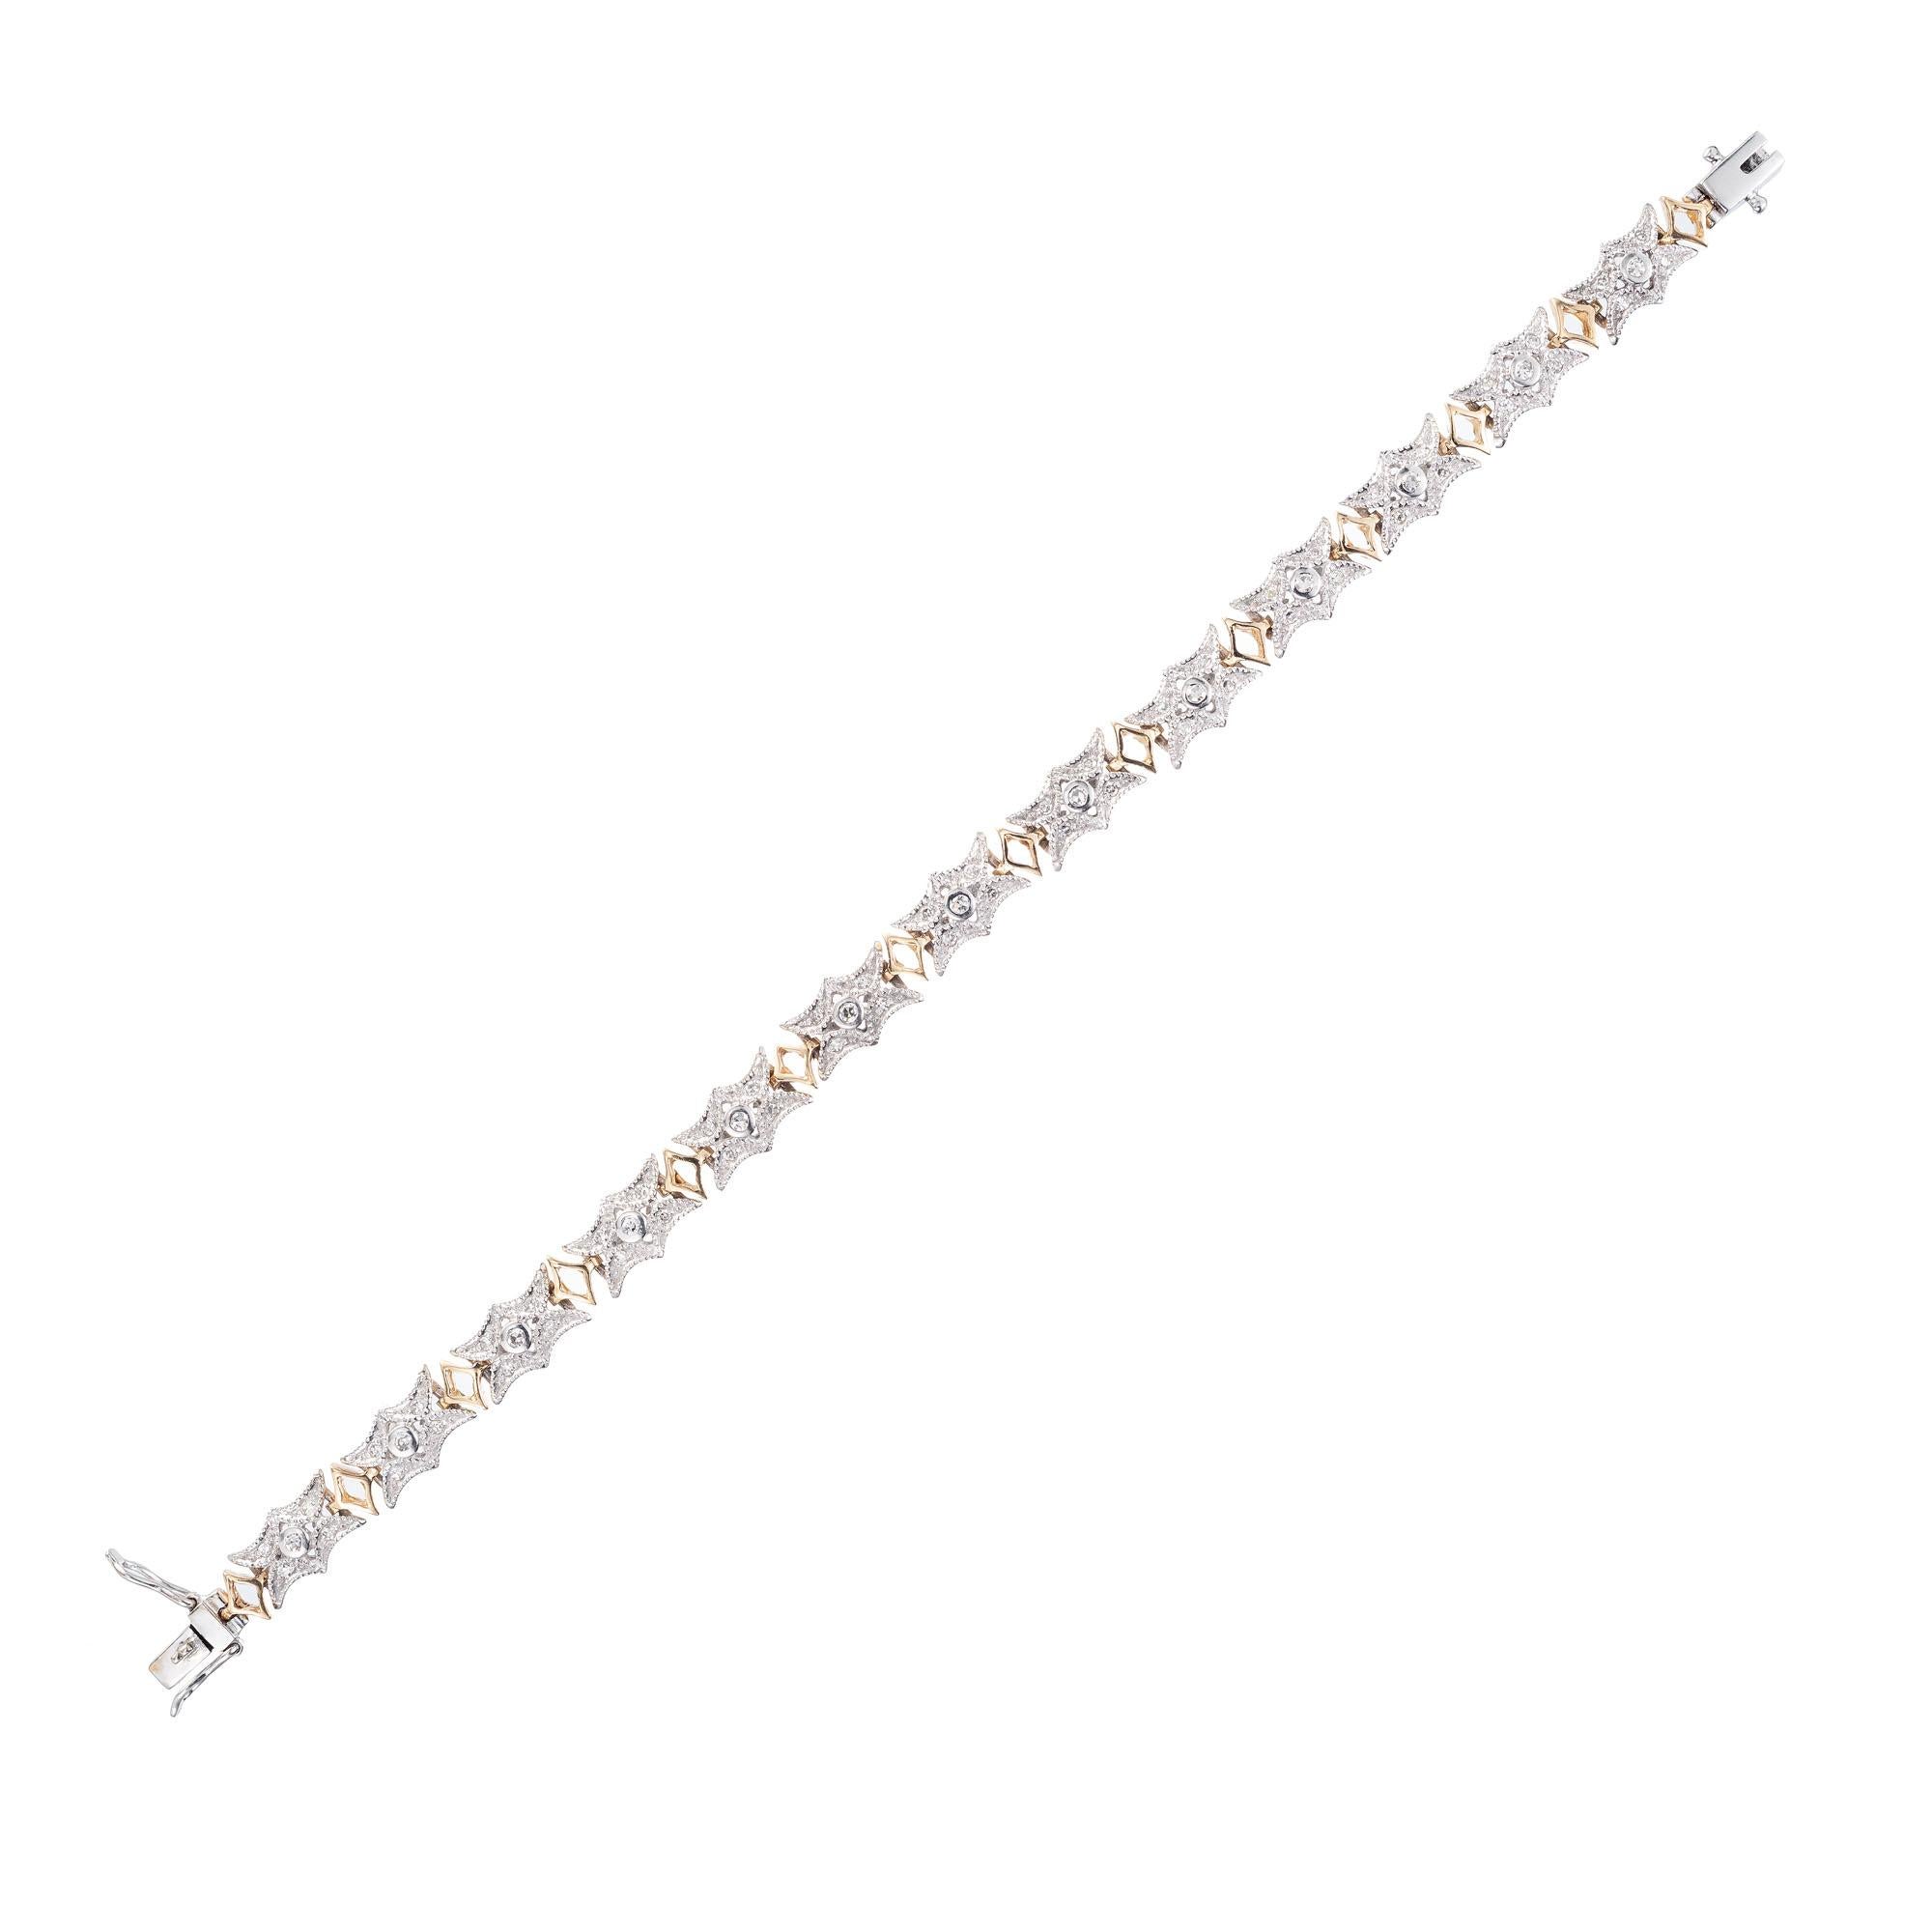 14k white and yellow gold link bracelet. Gold stretched star designs contain a center bezel set Diamond with four bead set Diamonds above and below the bezel. Yellow gold open Diamond shape link connects each white gold link. 7 inches. 

13 round